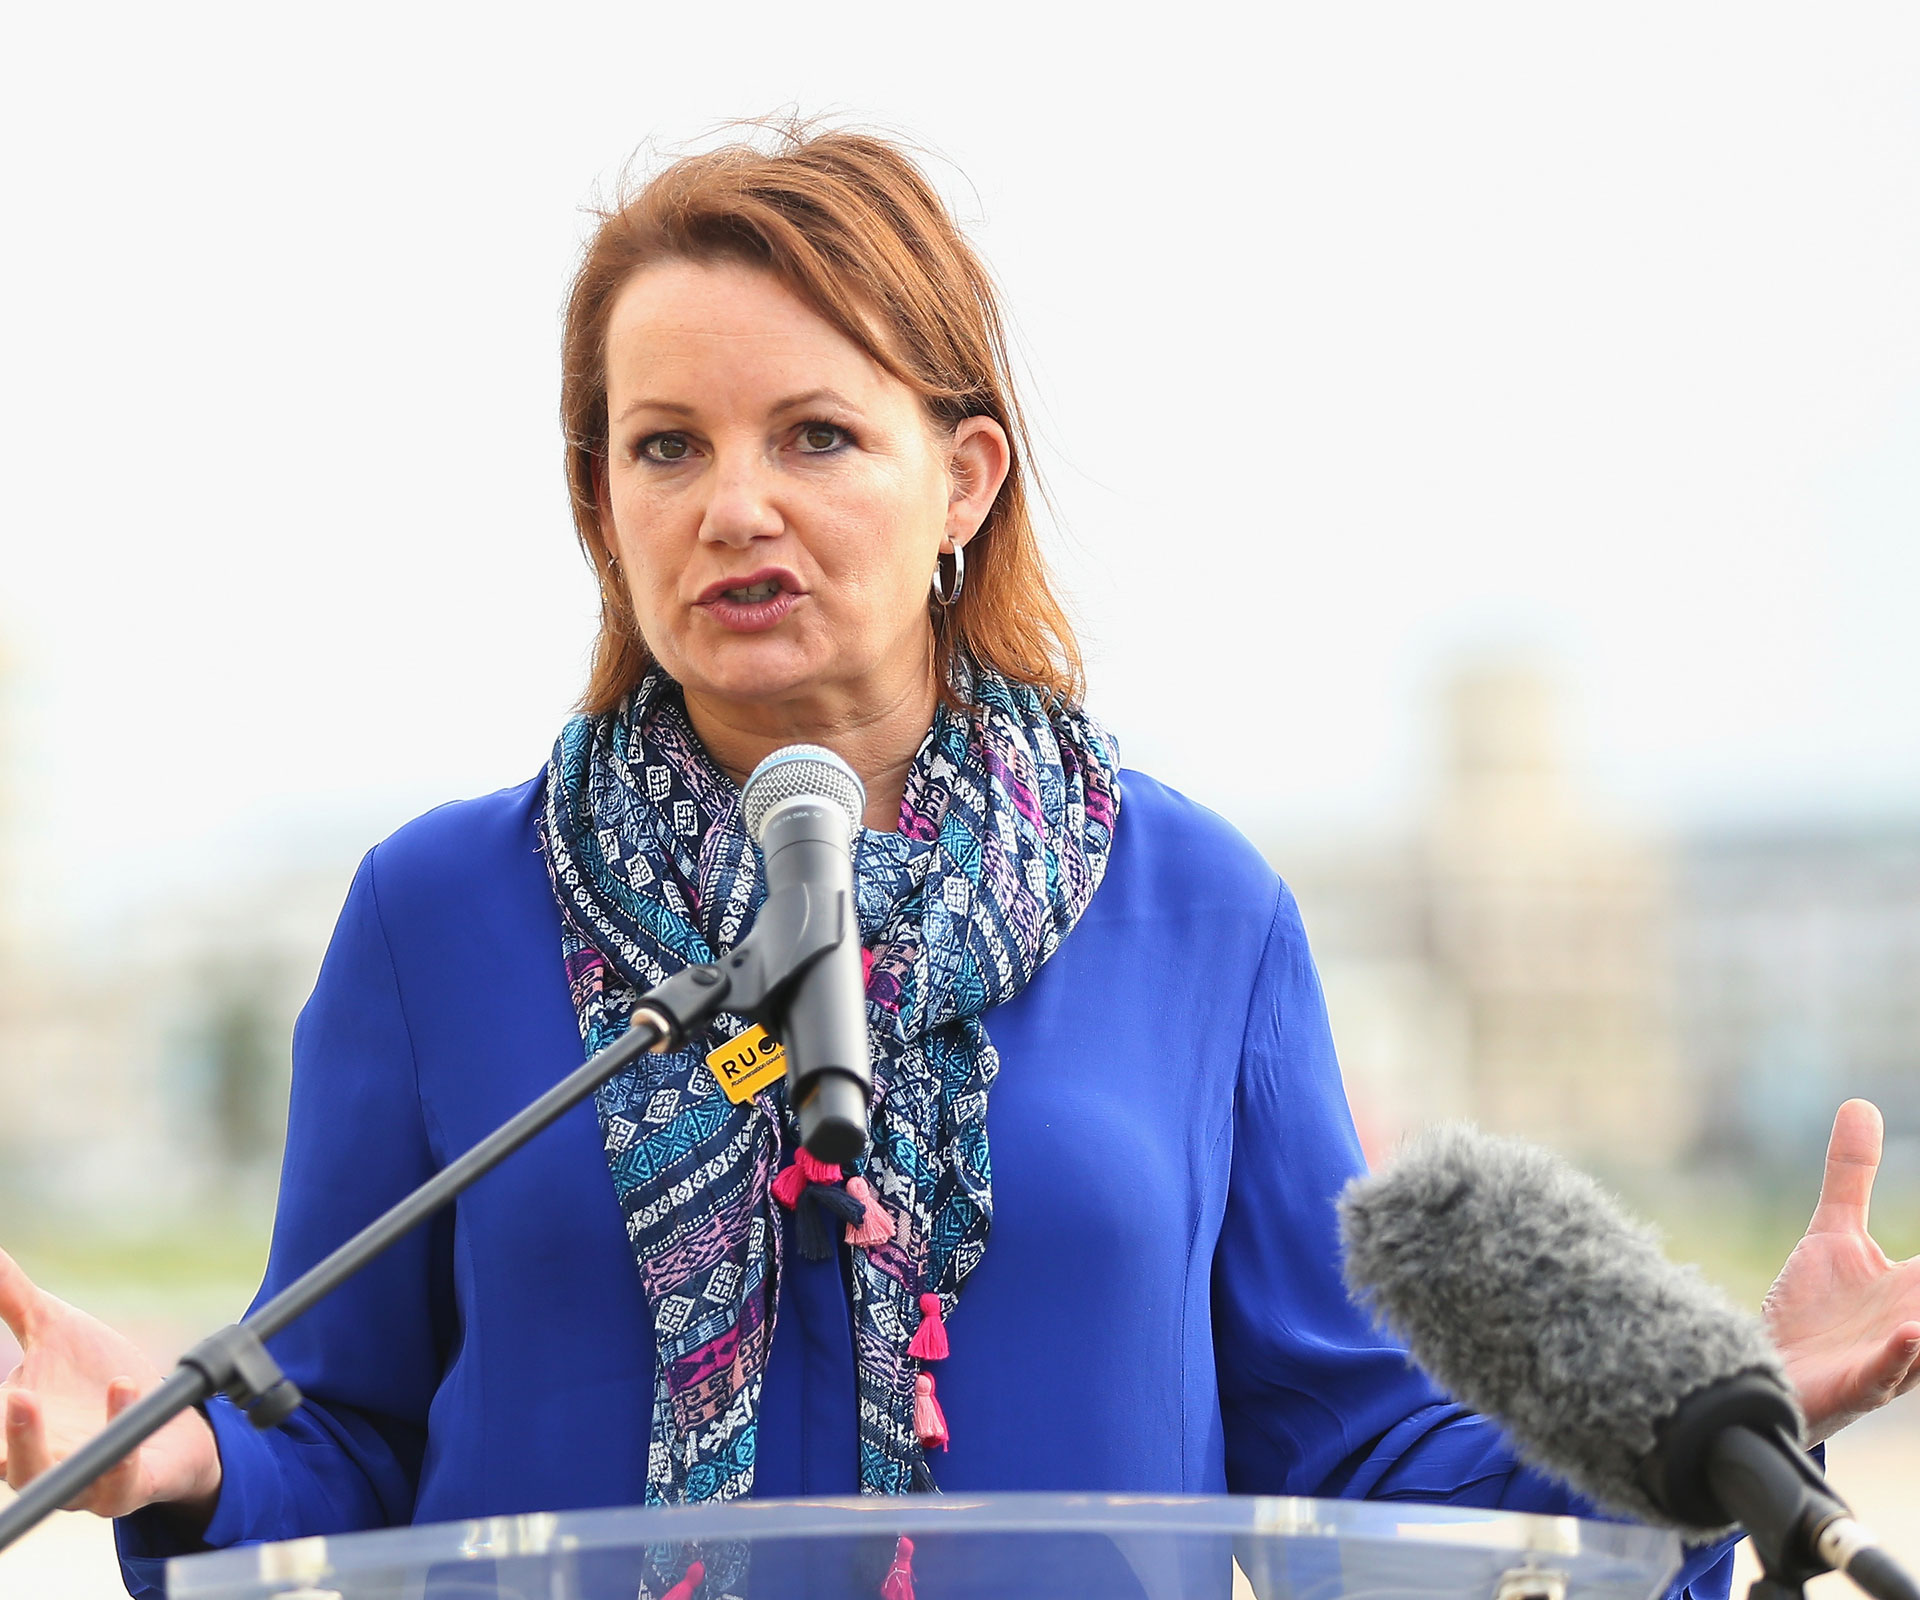 Breaking: Sussan Ley resigns as health minister over taxpayer-funded trips scandal